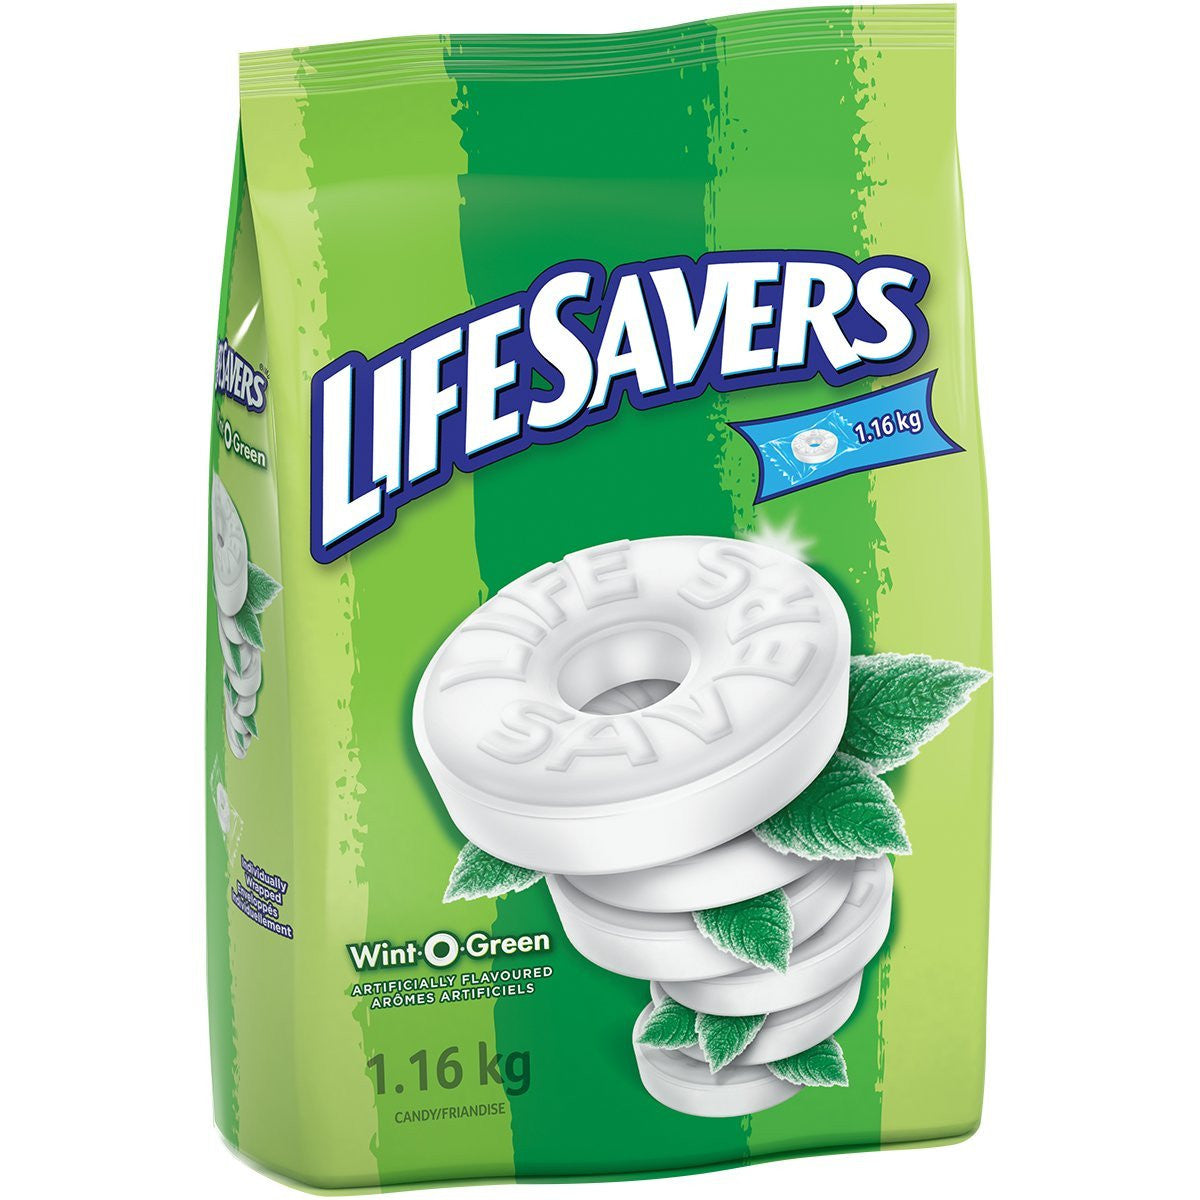 LifeSavers Wint-O-Green Mints, 1.16 Kg/2.55 Pounds {Imported from Canada}